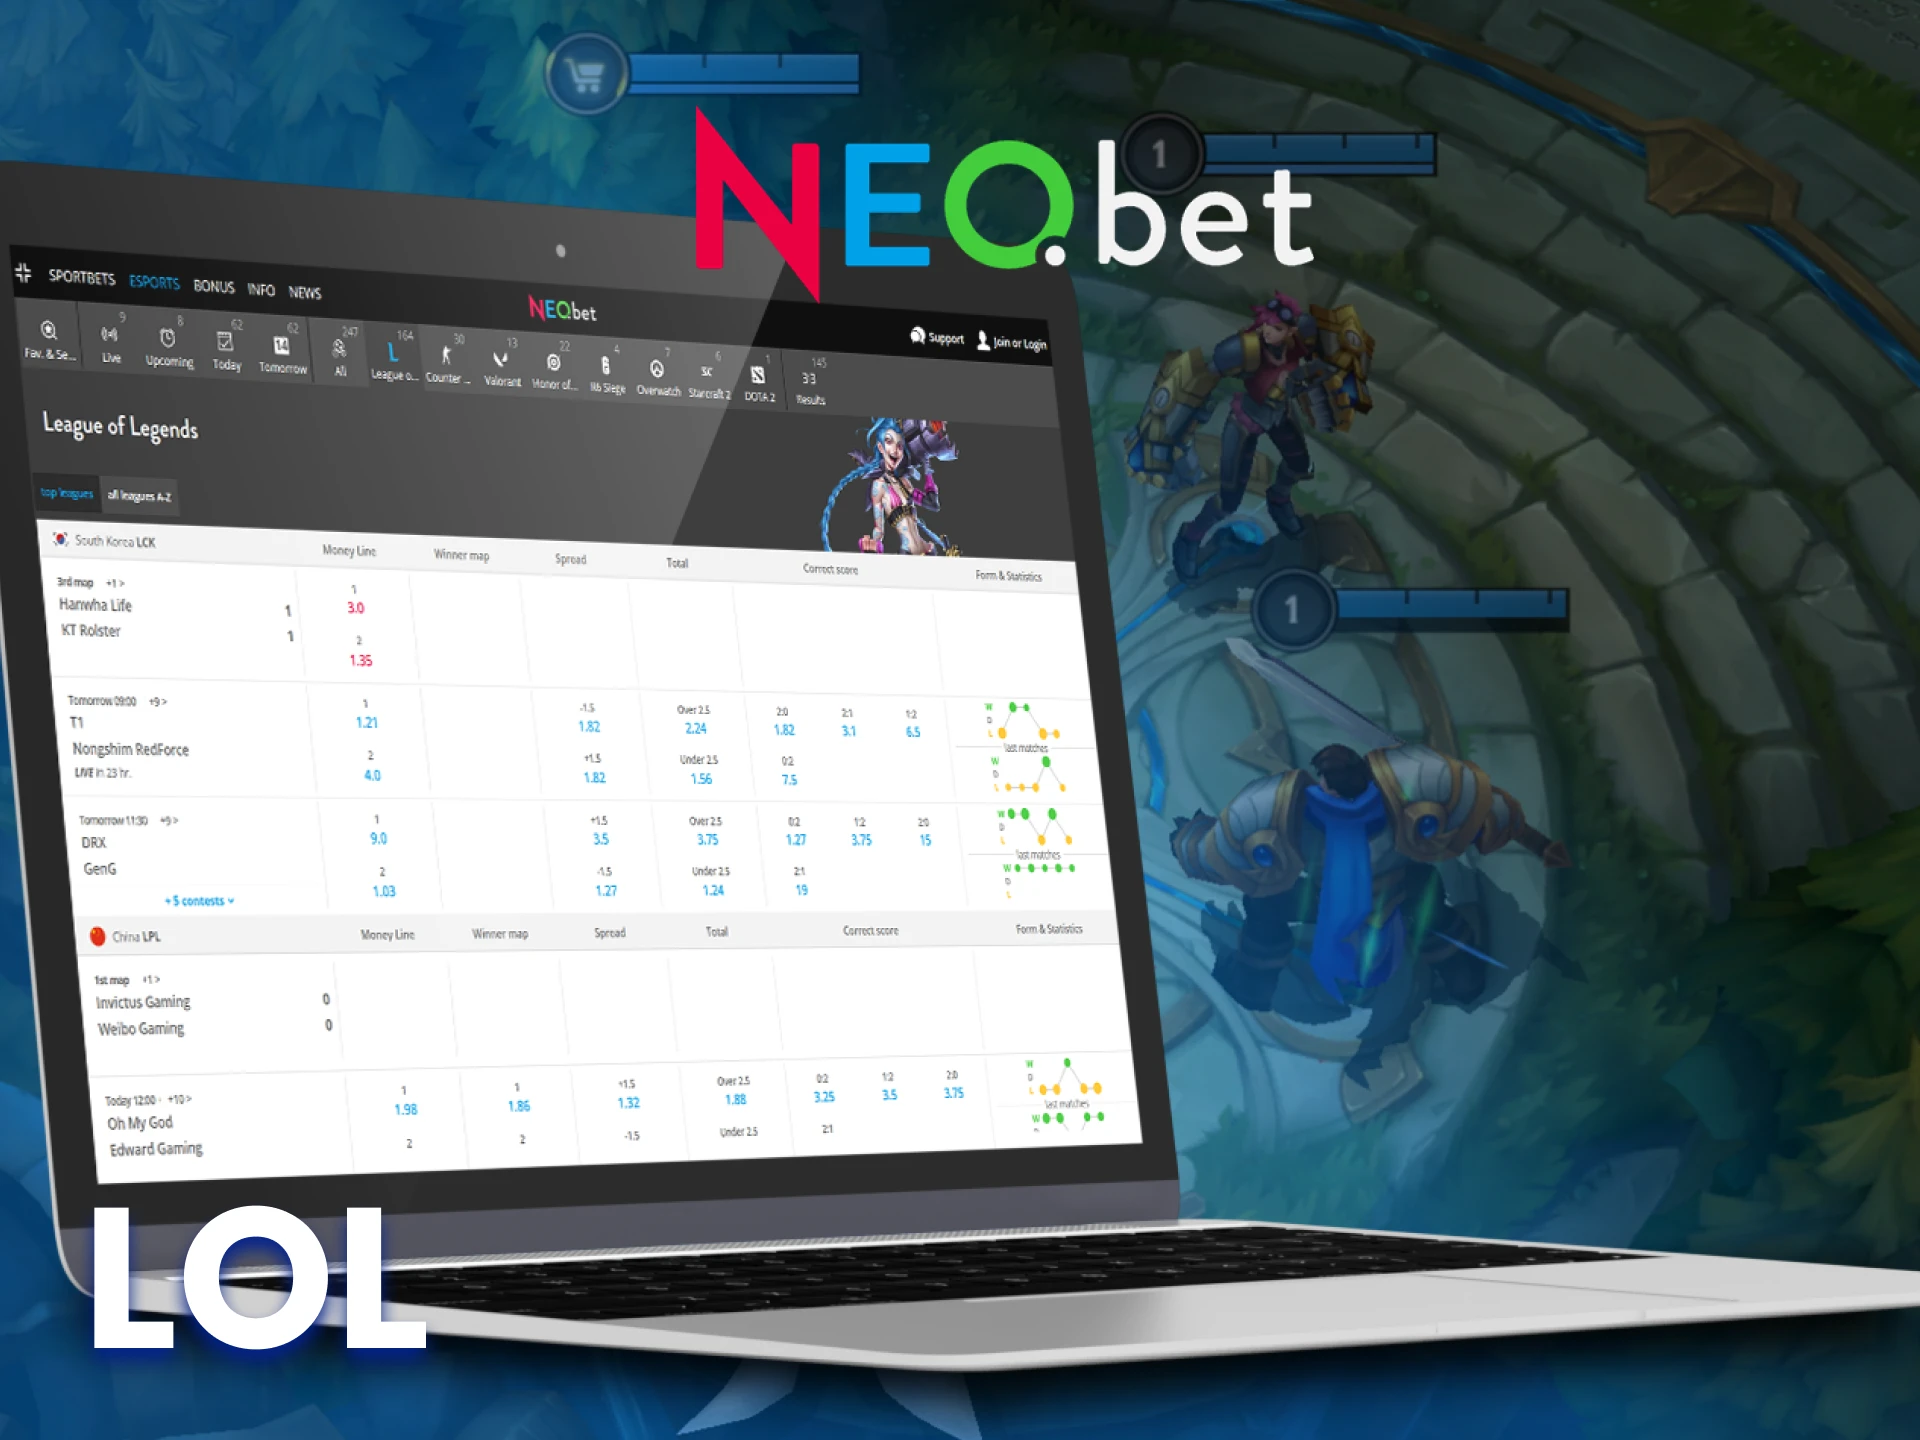 Place your bet on the League of Legends tournament at NEO.bet.